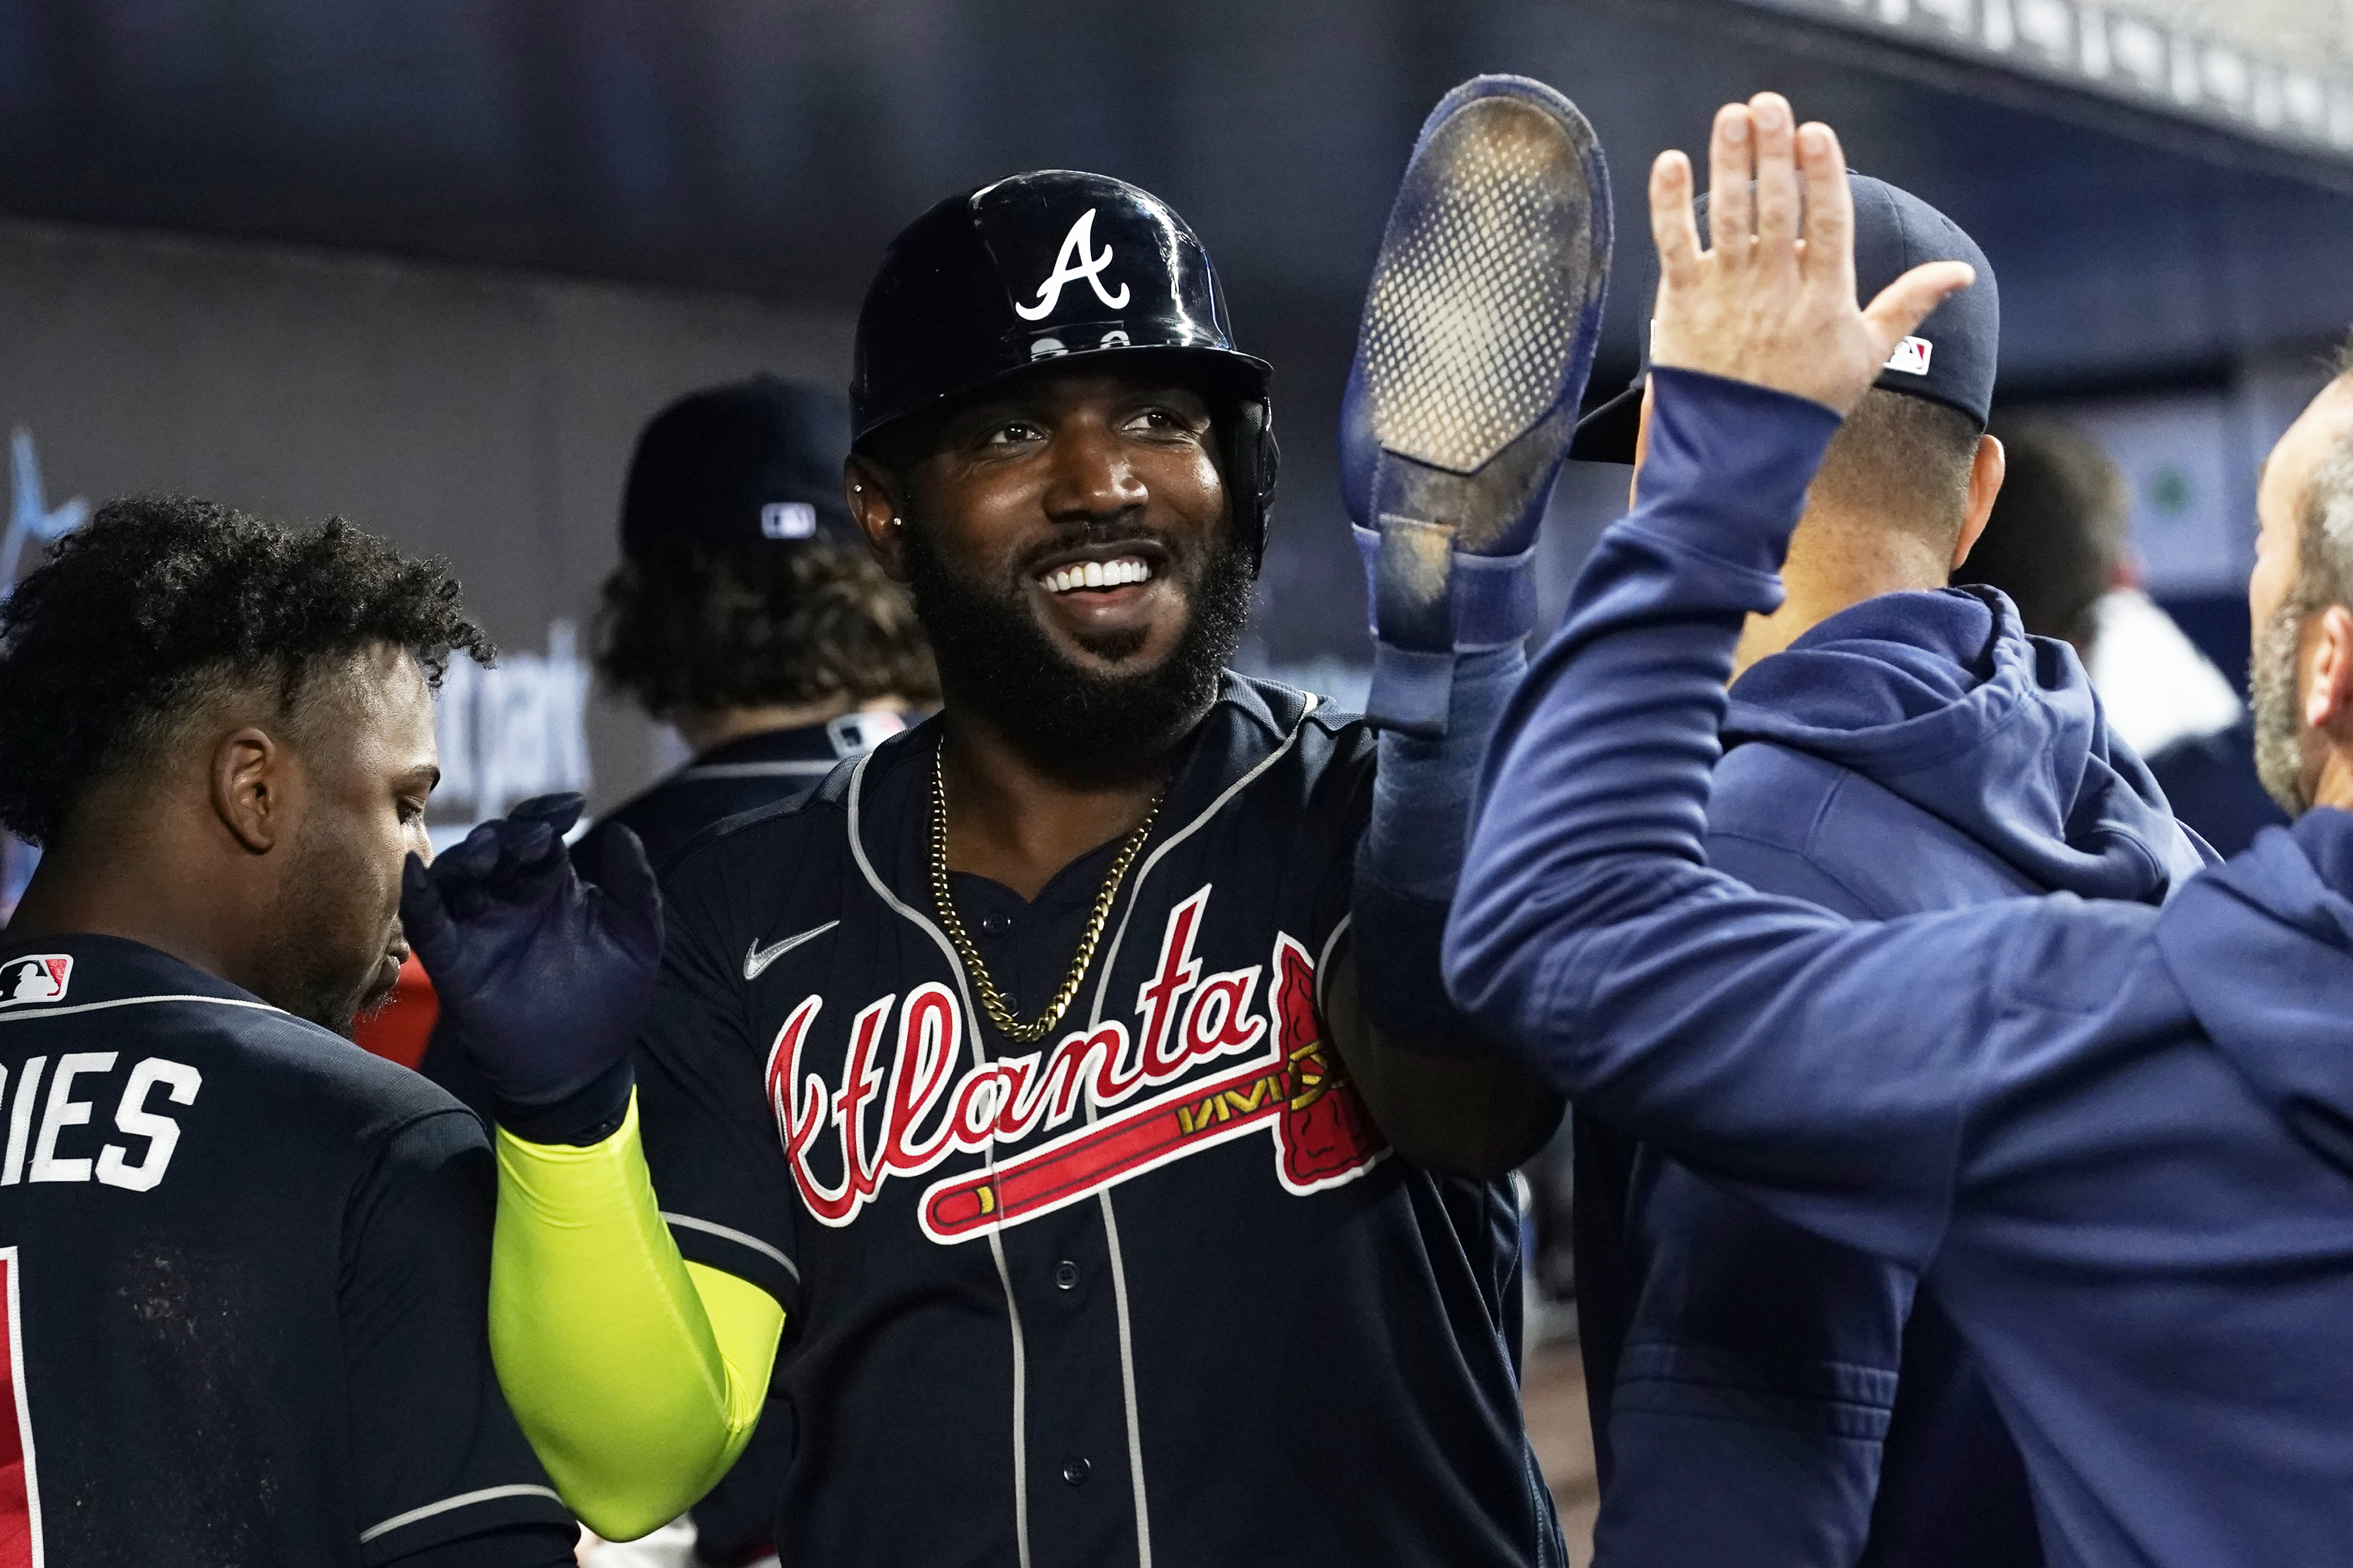 Braves: Marcell Ozuna gives positive injury update